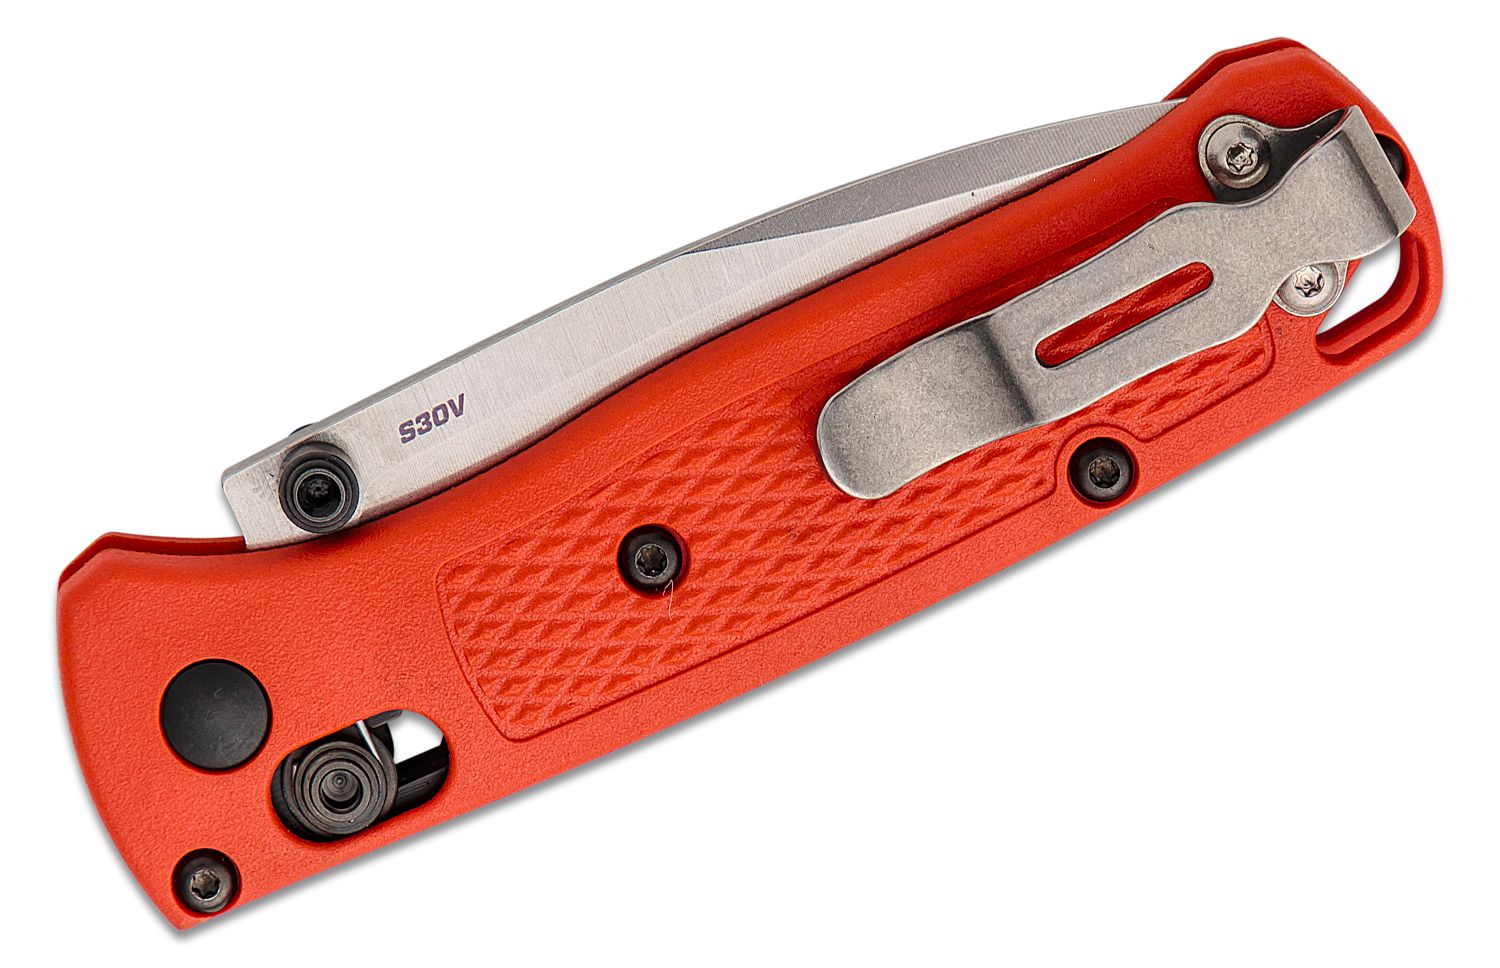 Benchmade Knives: 533-04 Mini Bugout - Mesa Red Grivory - CPM-S30V - AXIS  Lock